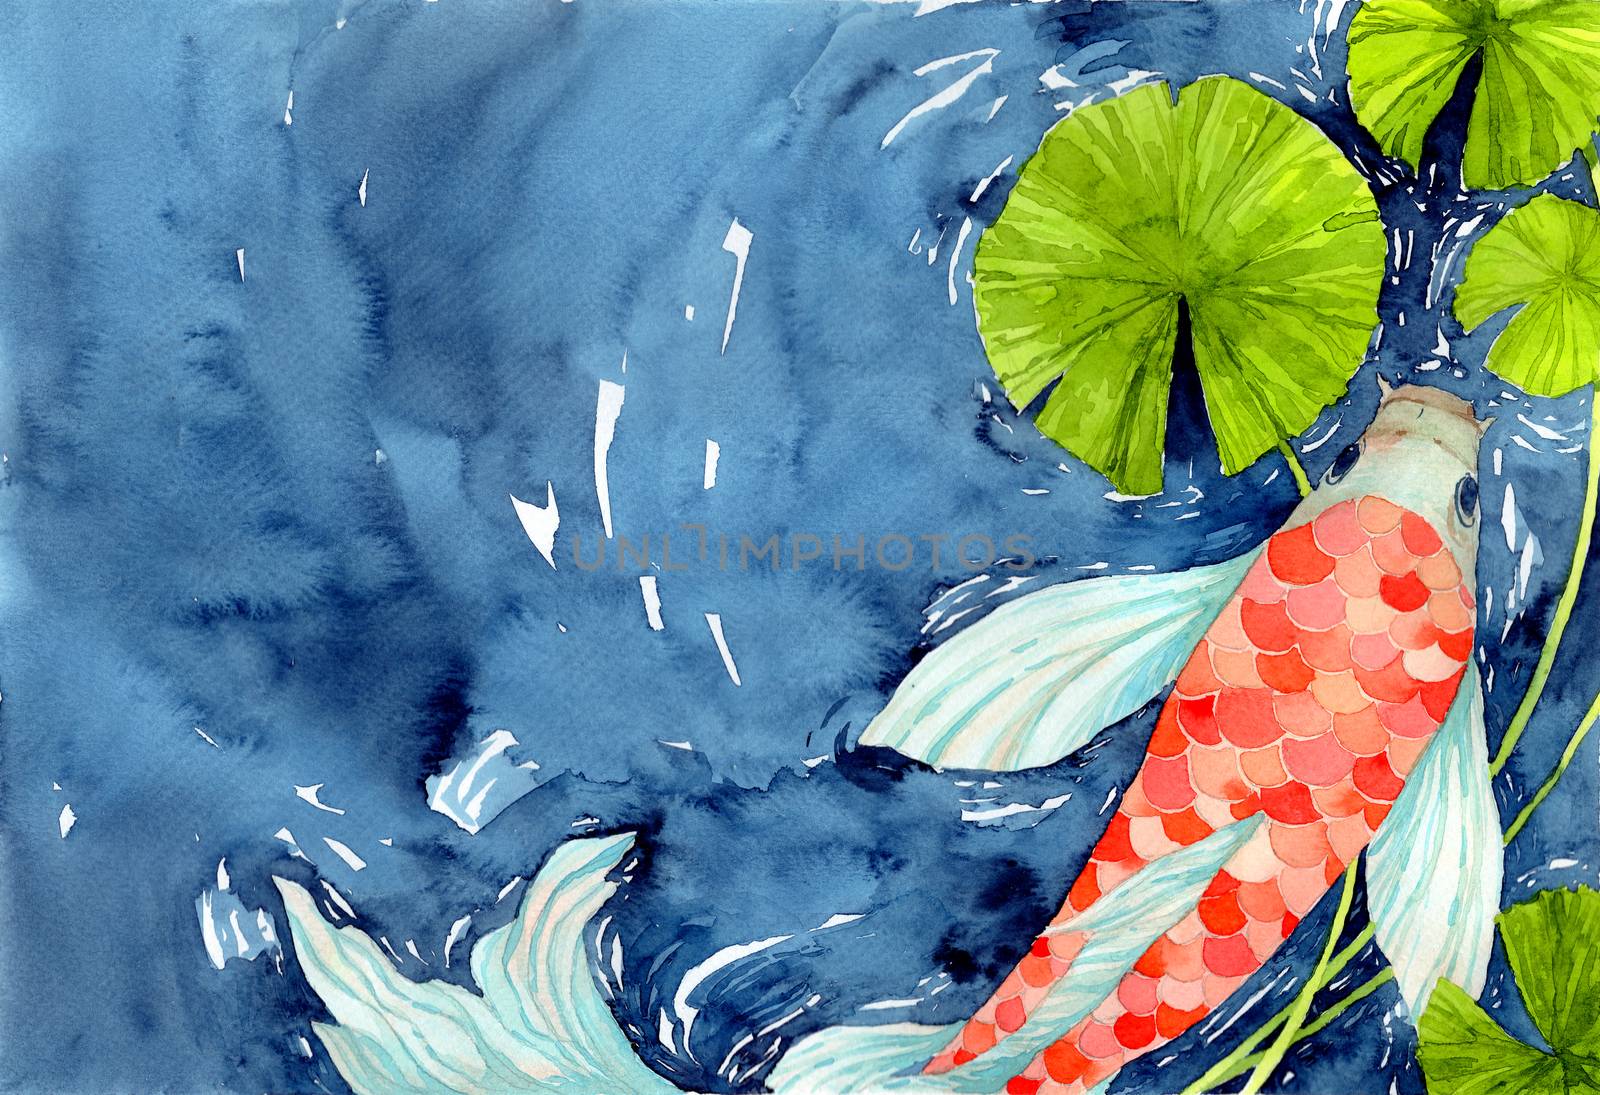 Koi carp fish in pond, symbol of good luck and prosperity. Watercolor hand painting illustration. by Ungamrung